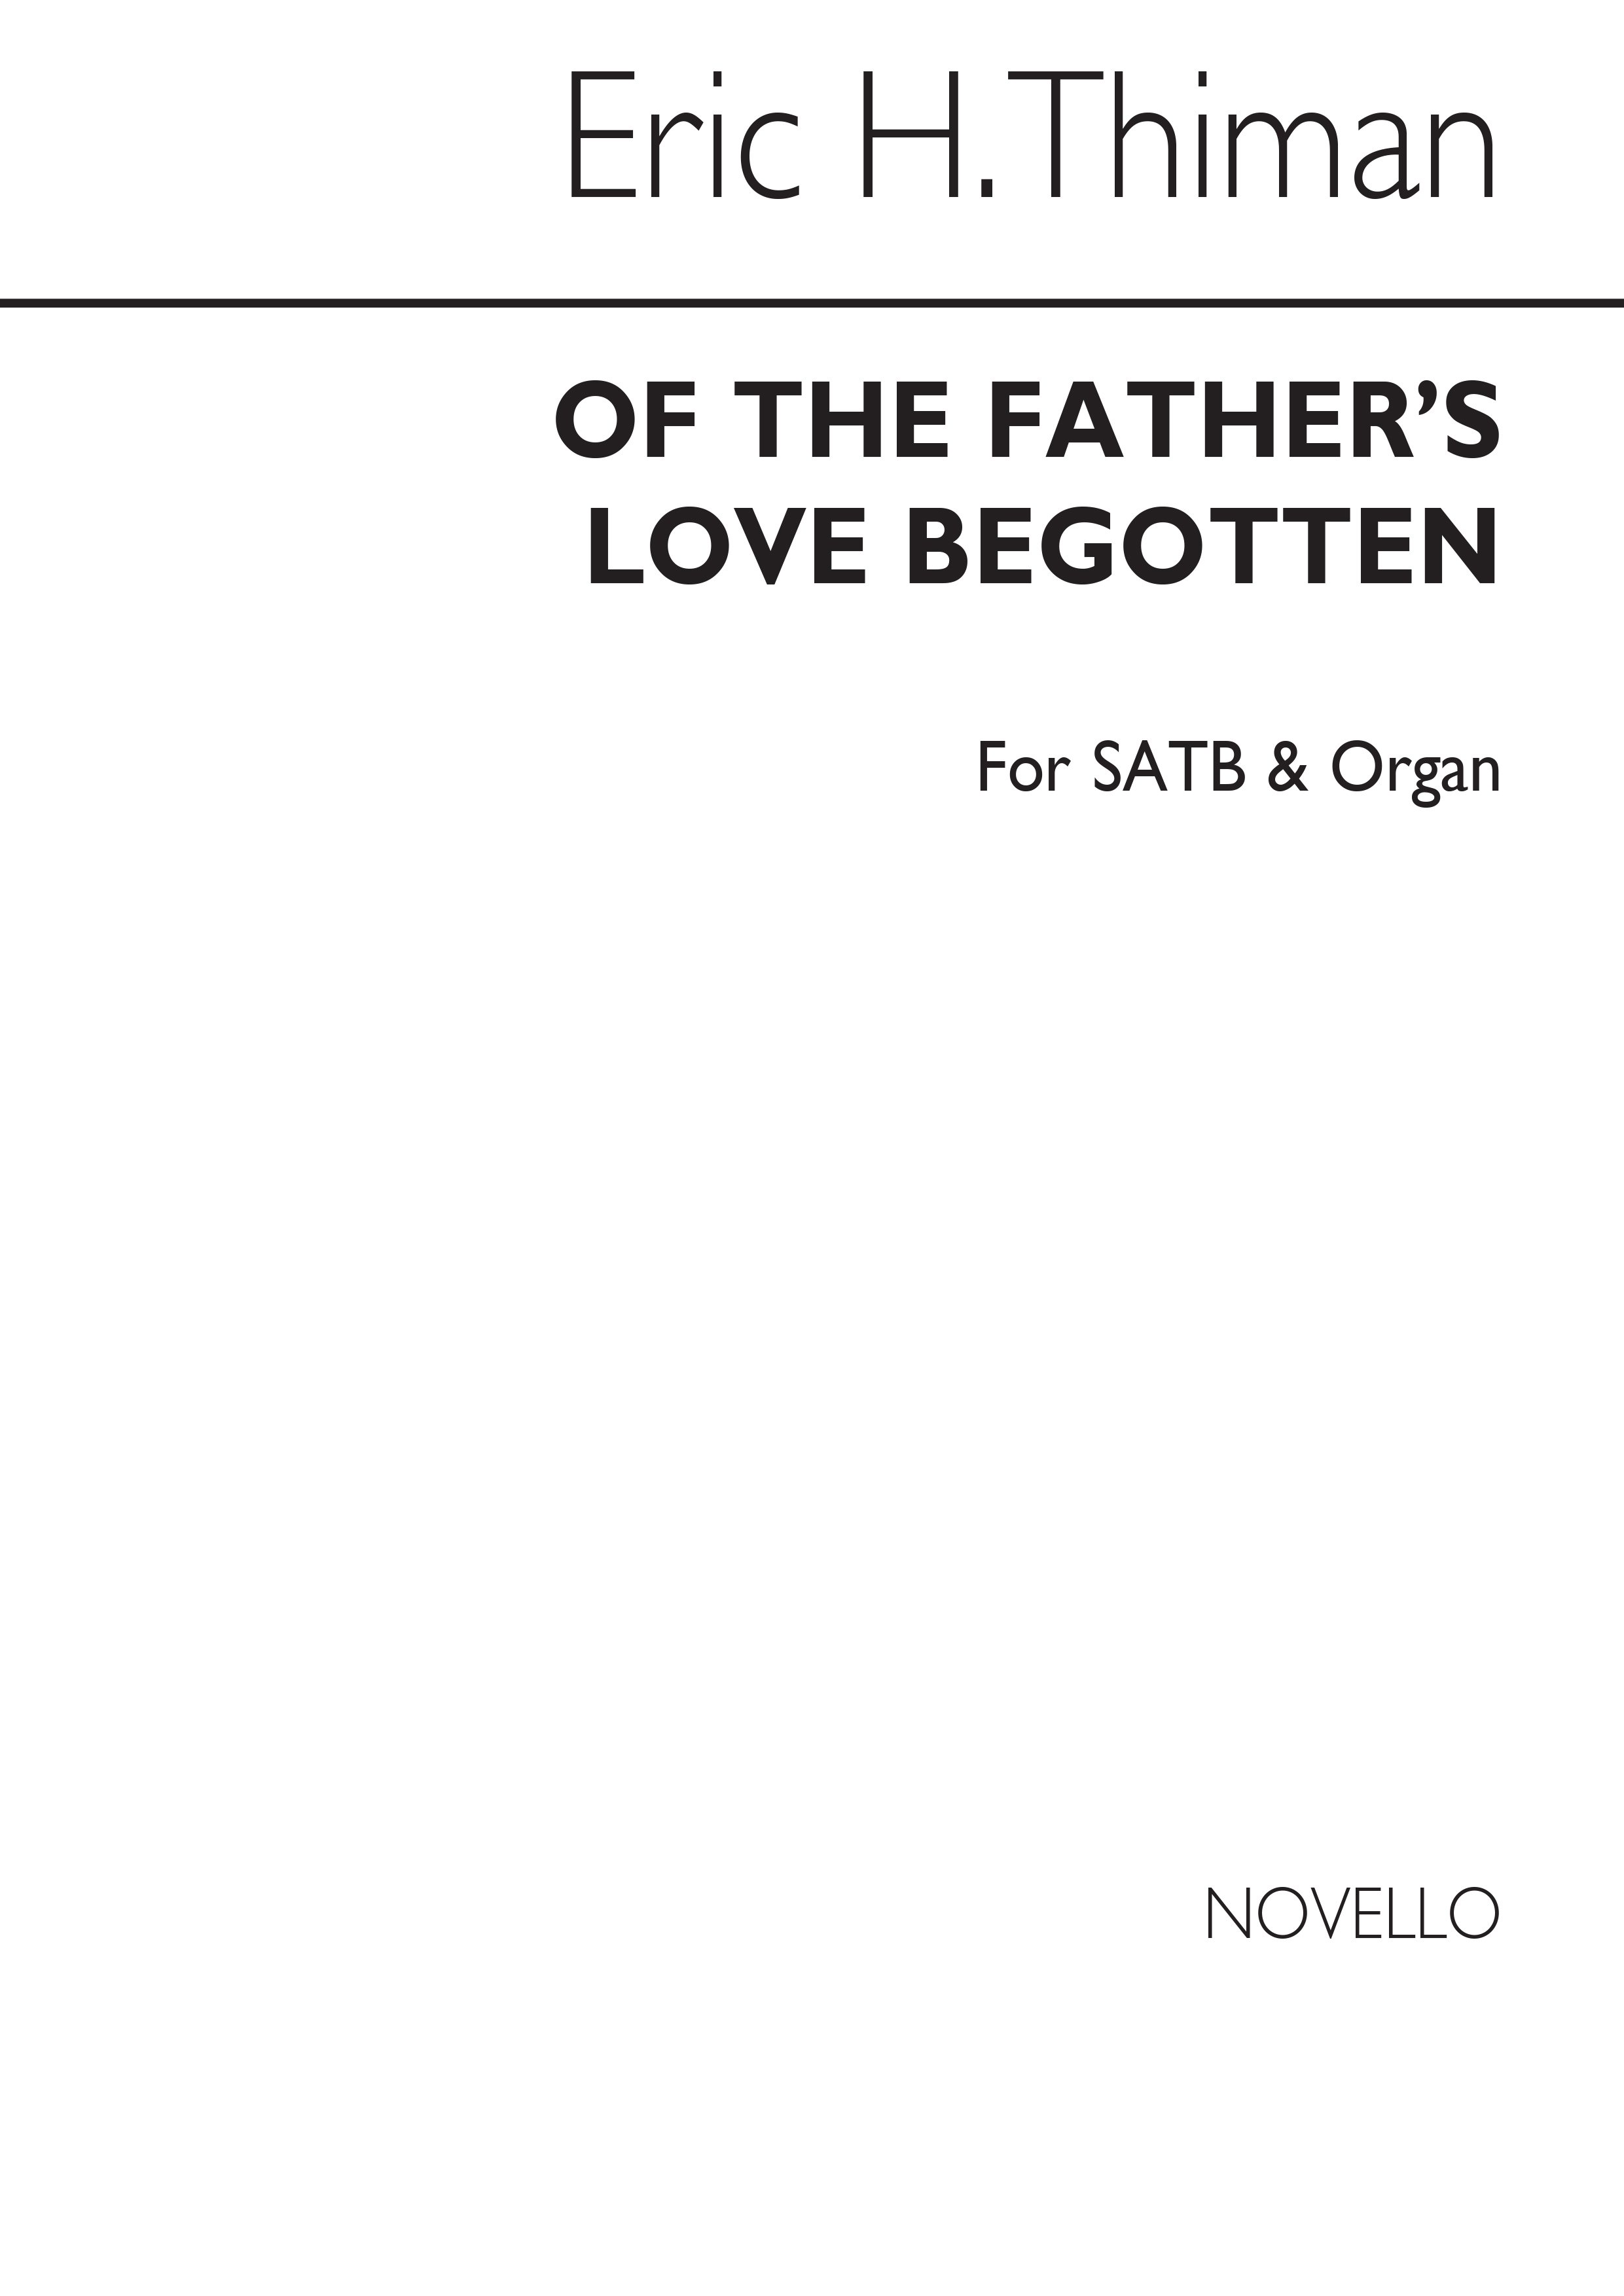 Eric Thiman: Of The Father's Love Begotten